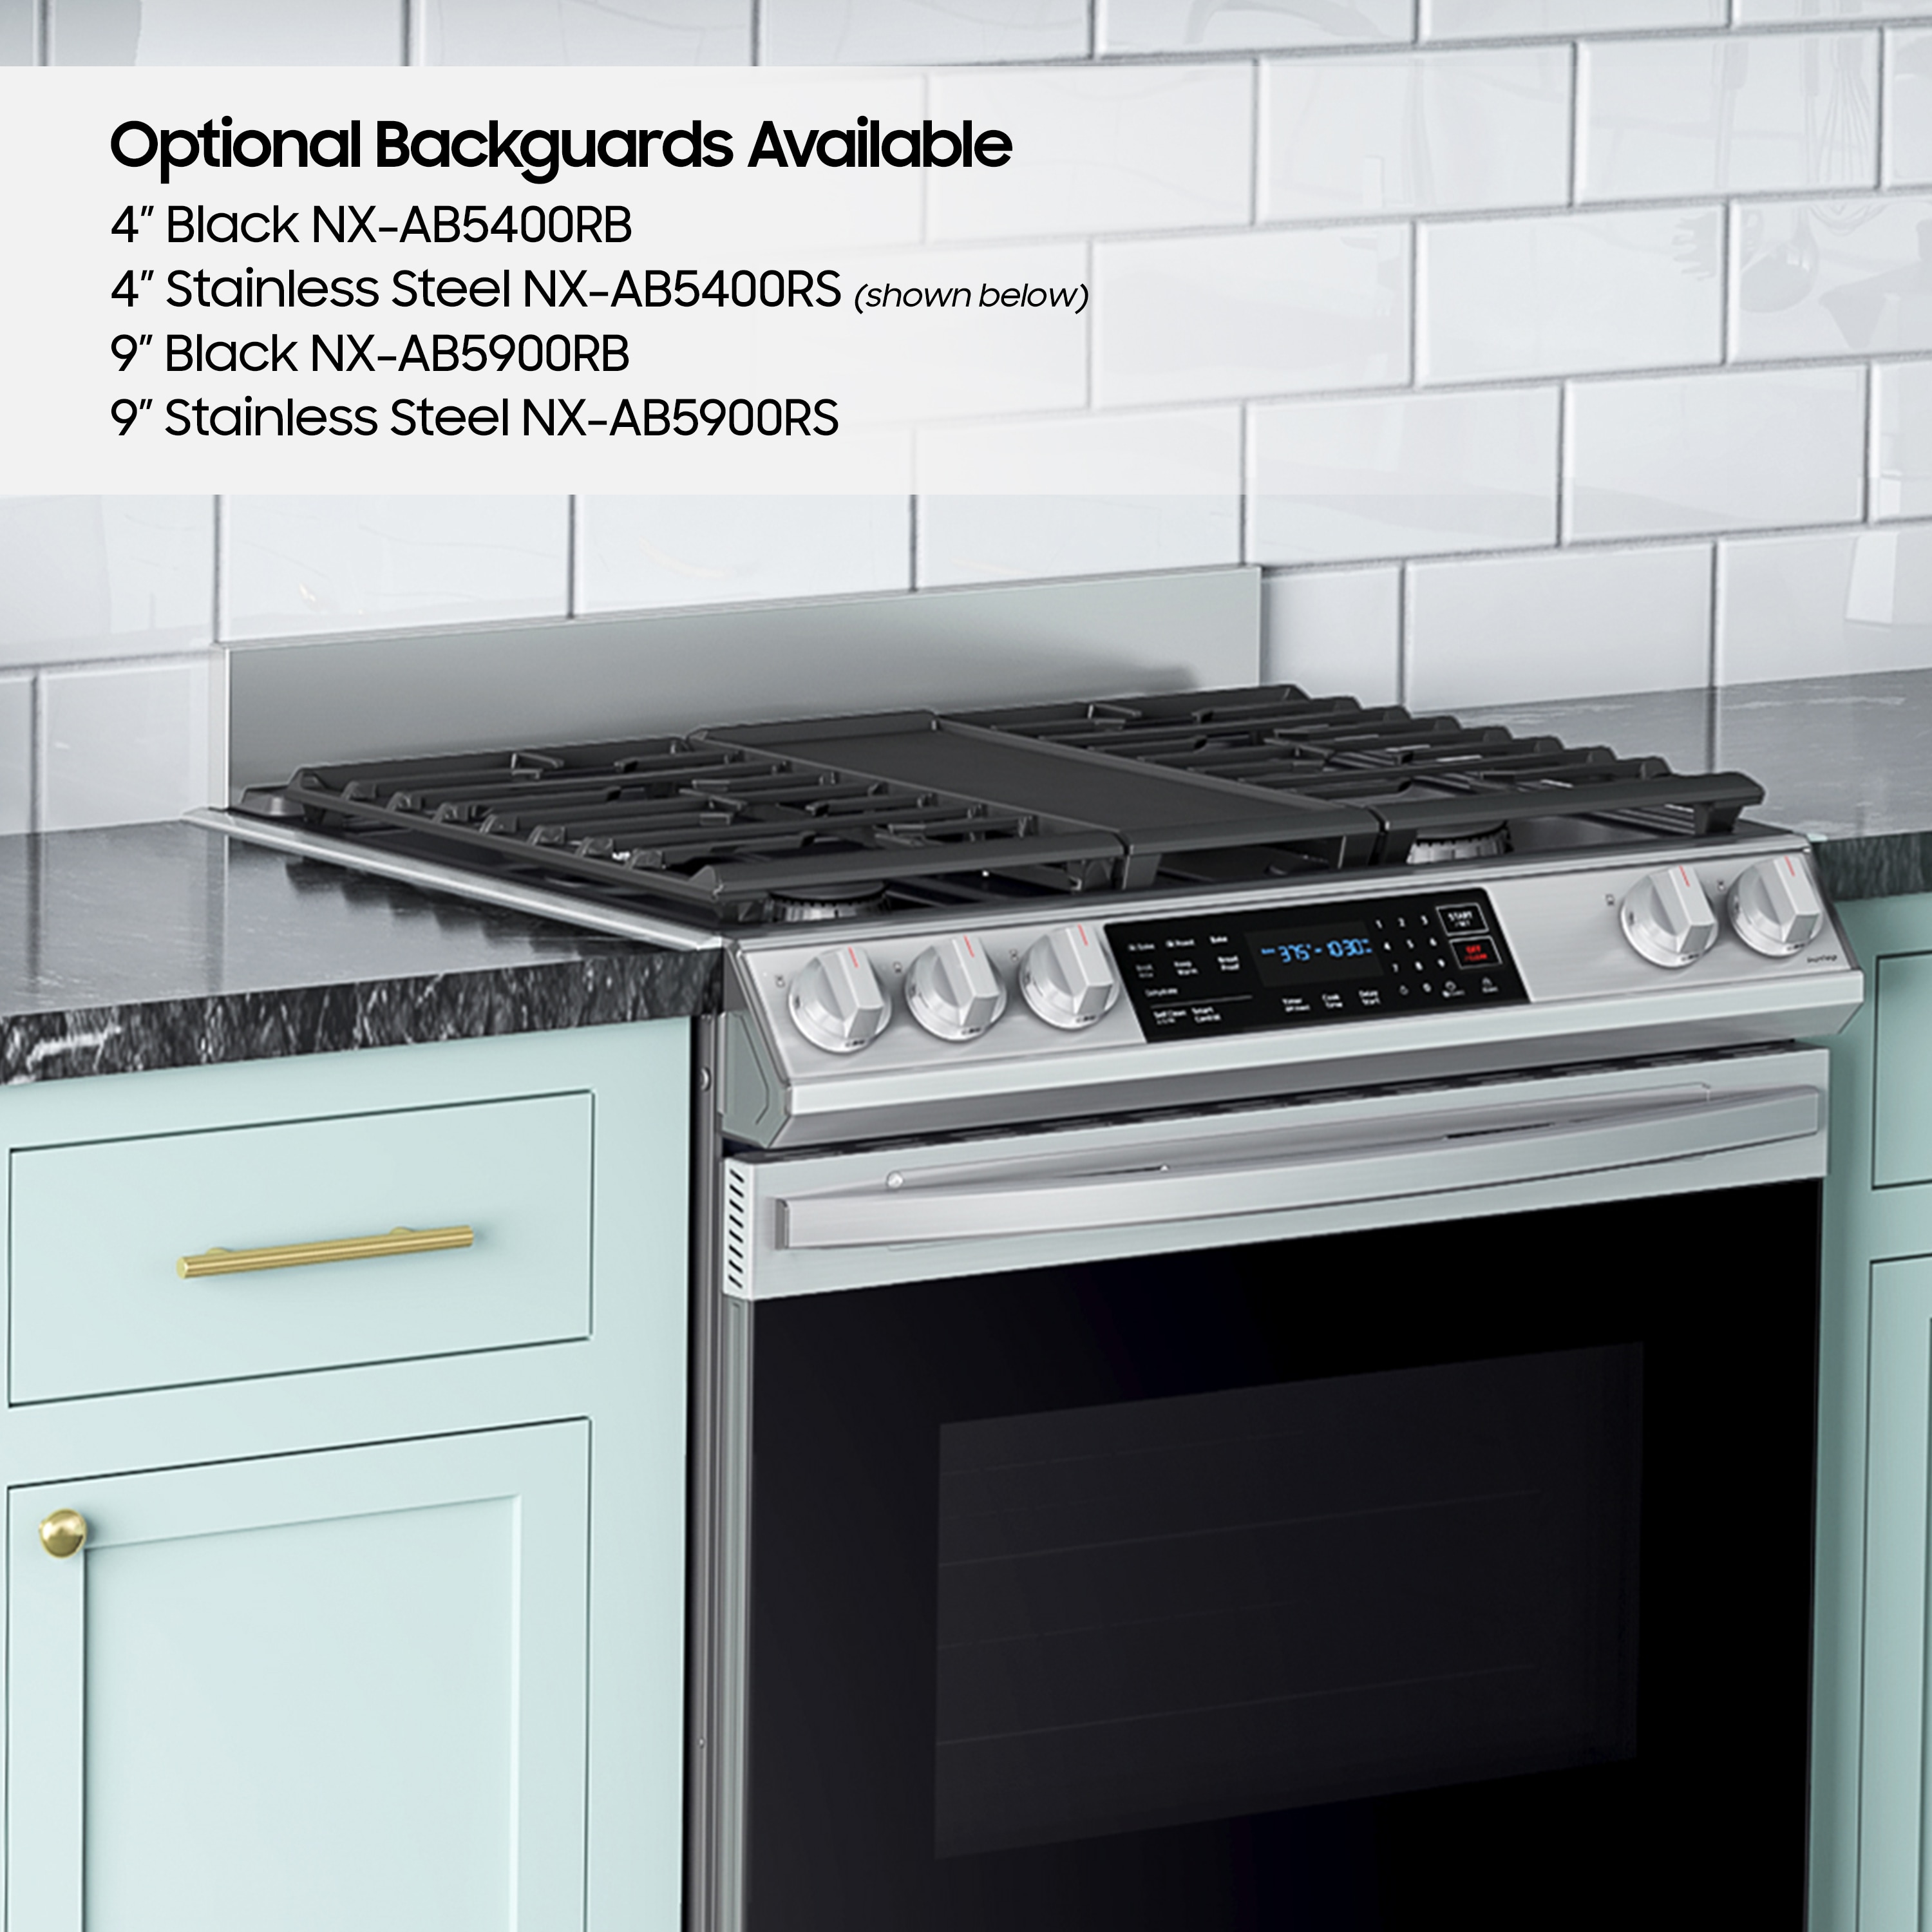 Samsung 6.3 Cu. ft. Smart Freestanding Electric Range with No-Preheat Air Fry, Convection+ & Griddle - Stainless Steel